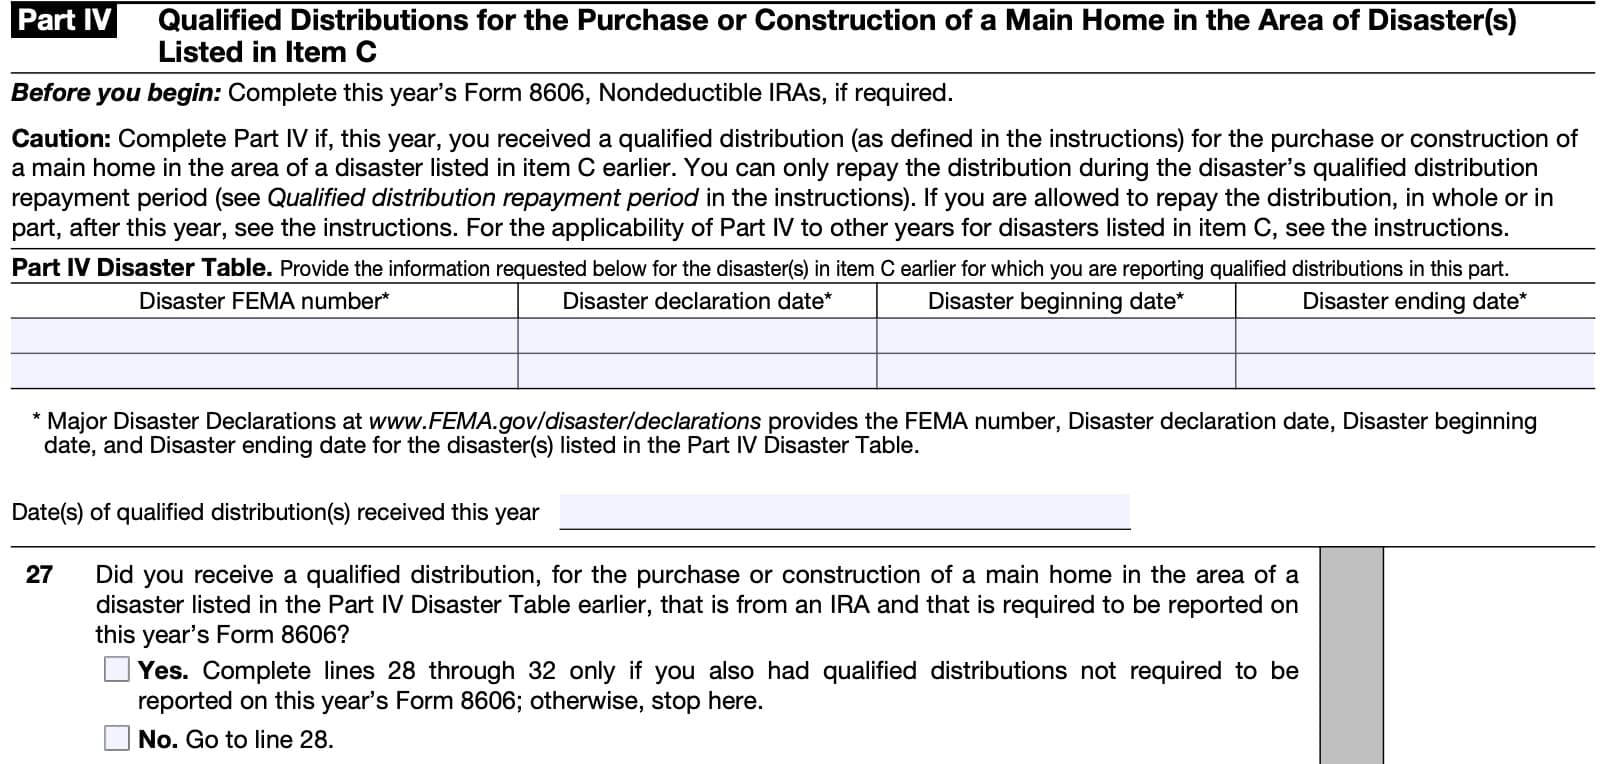 irs form 8915-f, part IV: qualified distributions for the purchase or construction of a main home in the area of disaster(s) listed in item c